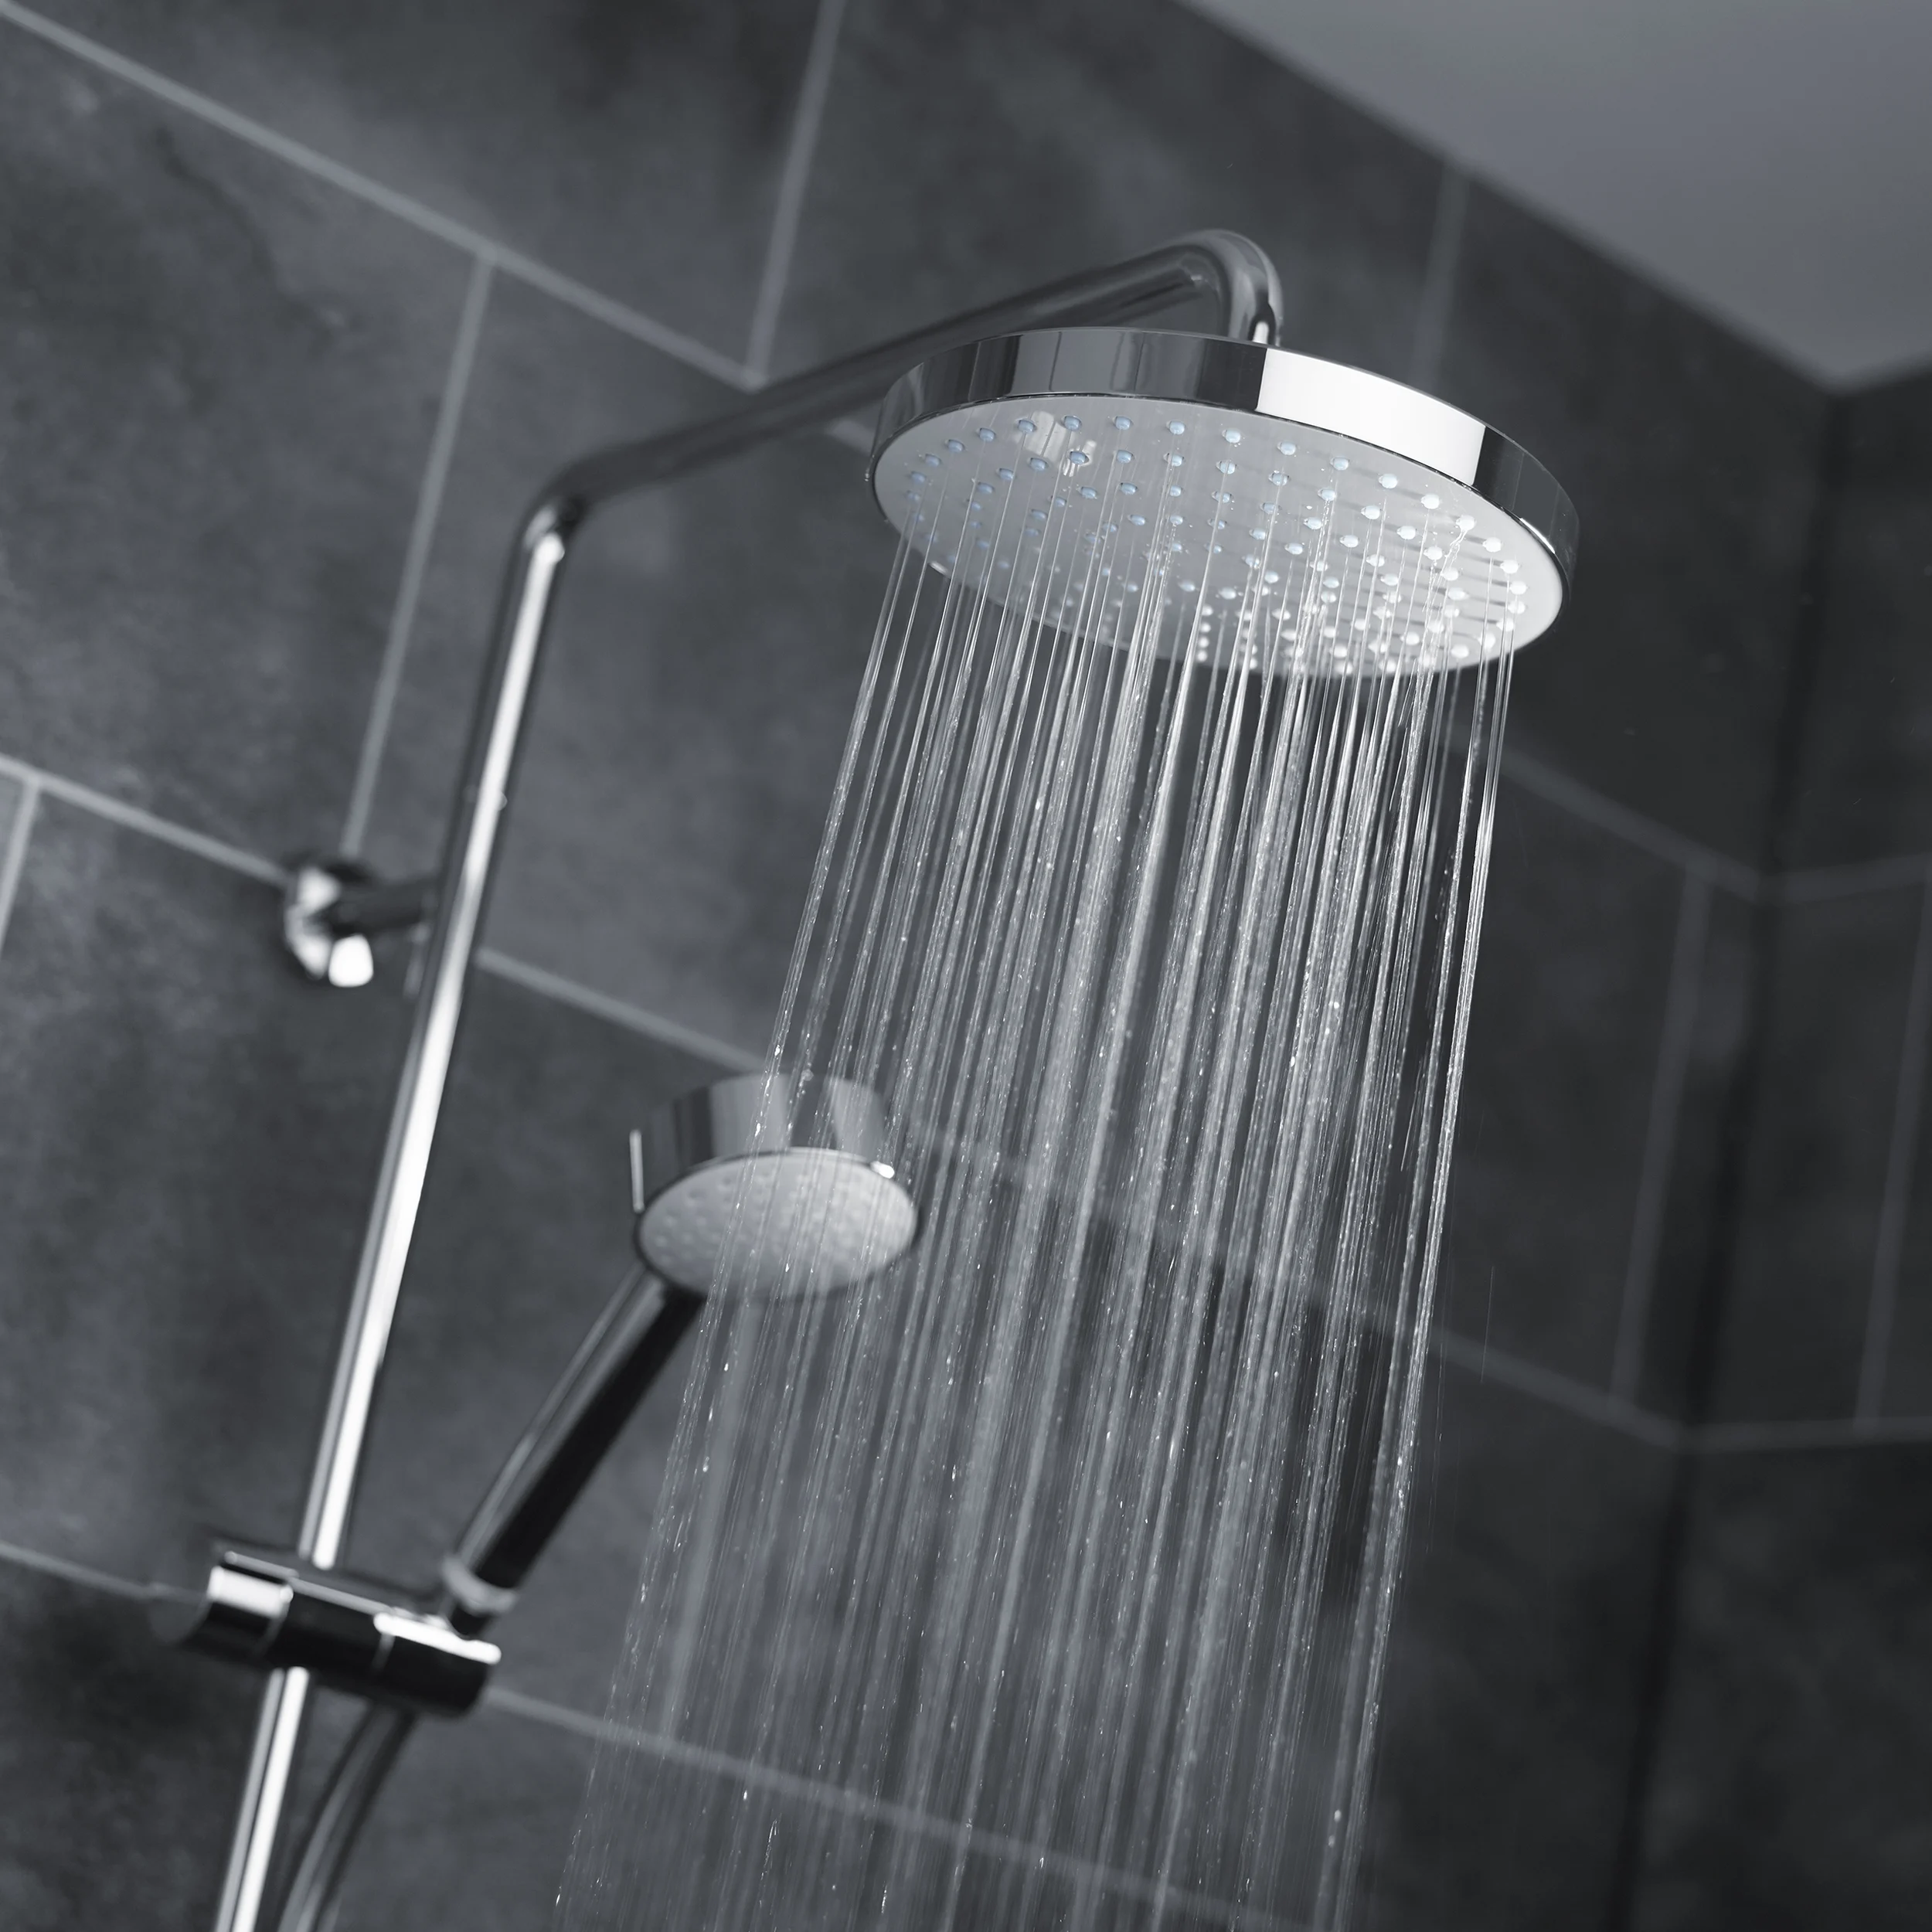 The small bucket is a shower head, the large one is a rain head